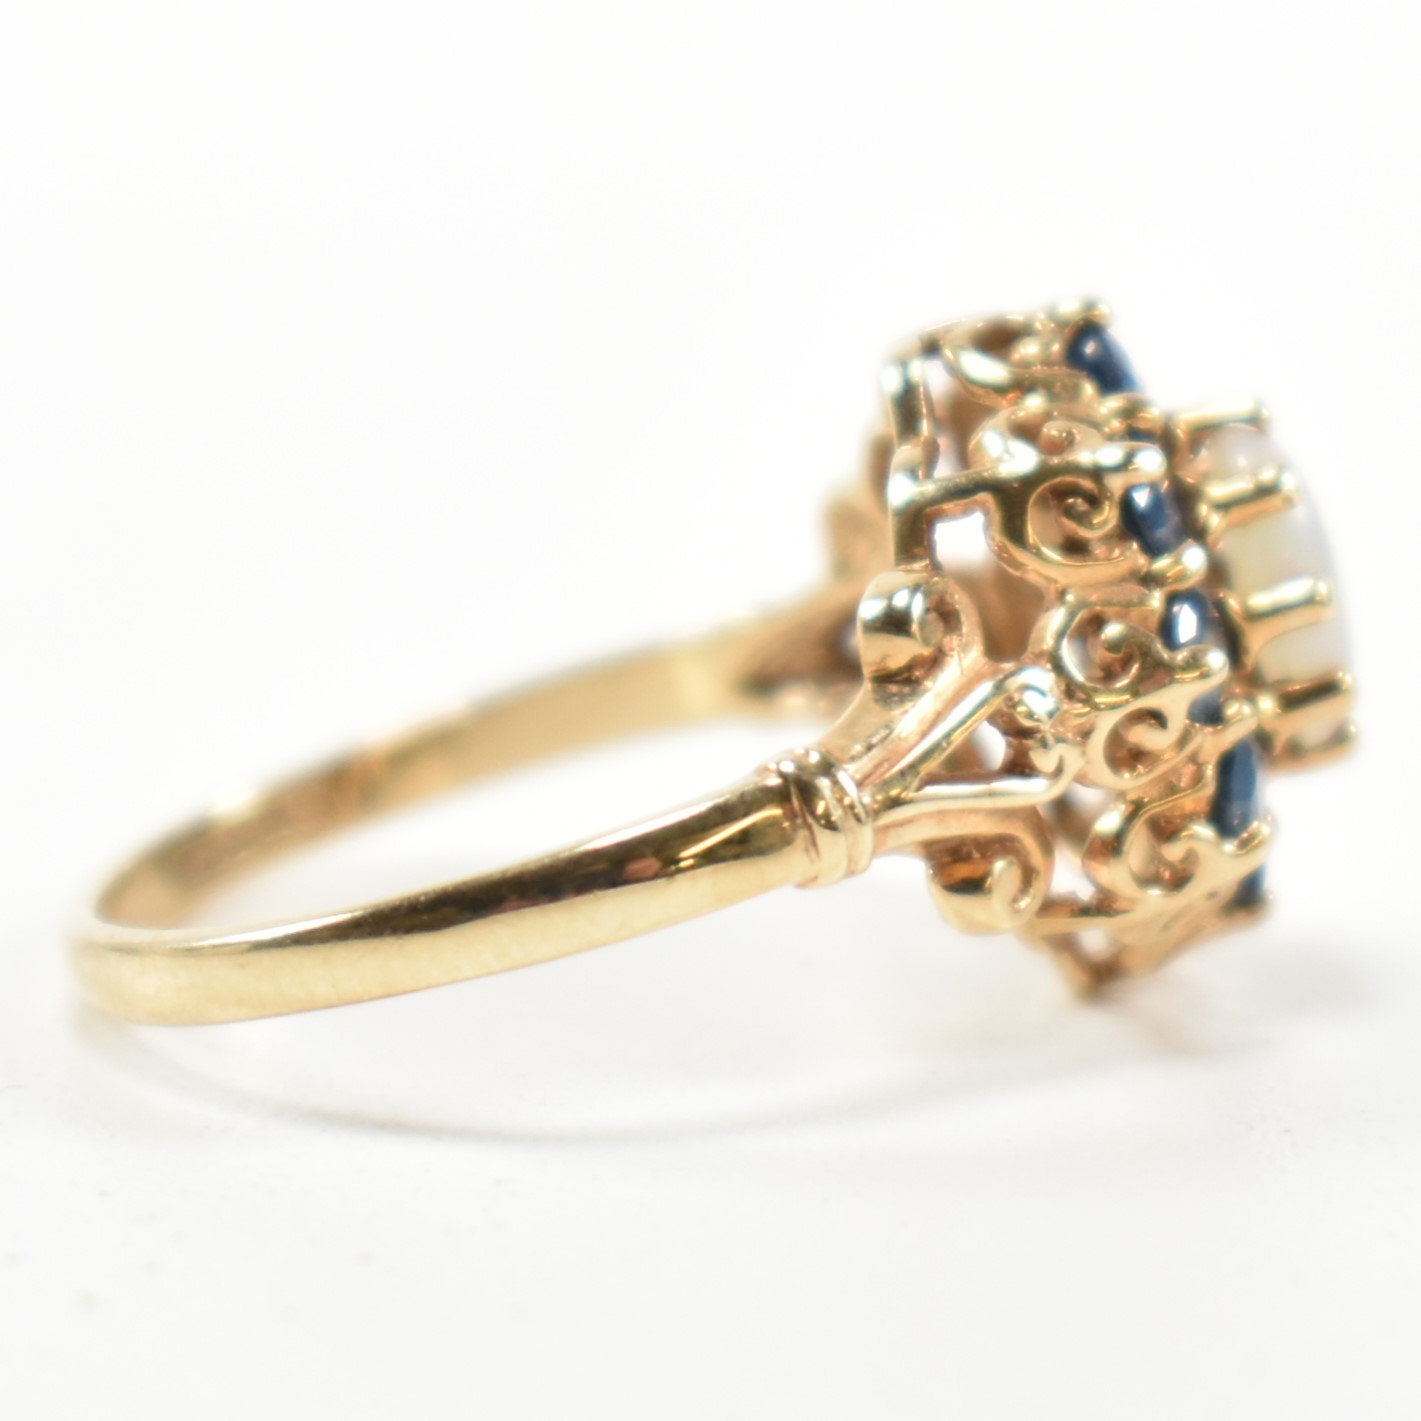 HALLMARKED 9CT GOLD SAPPHIRE & OPAL CLUSTER RING - Image 6 of 11